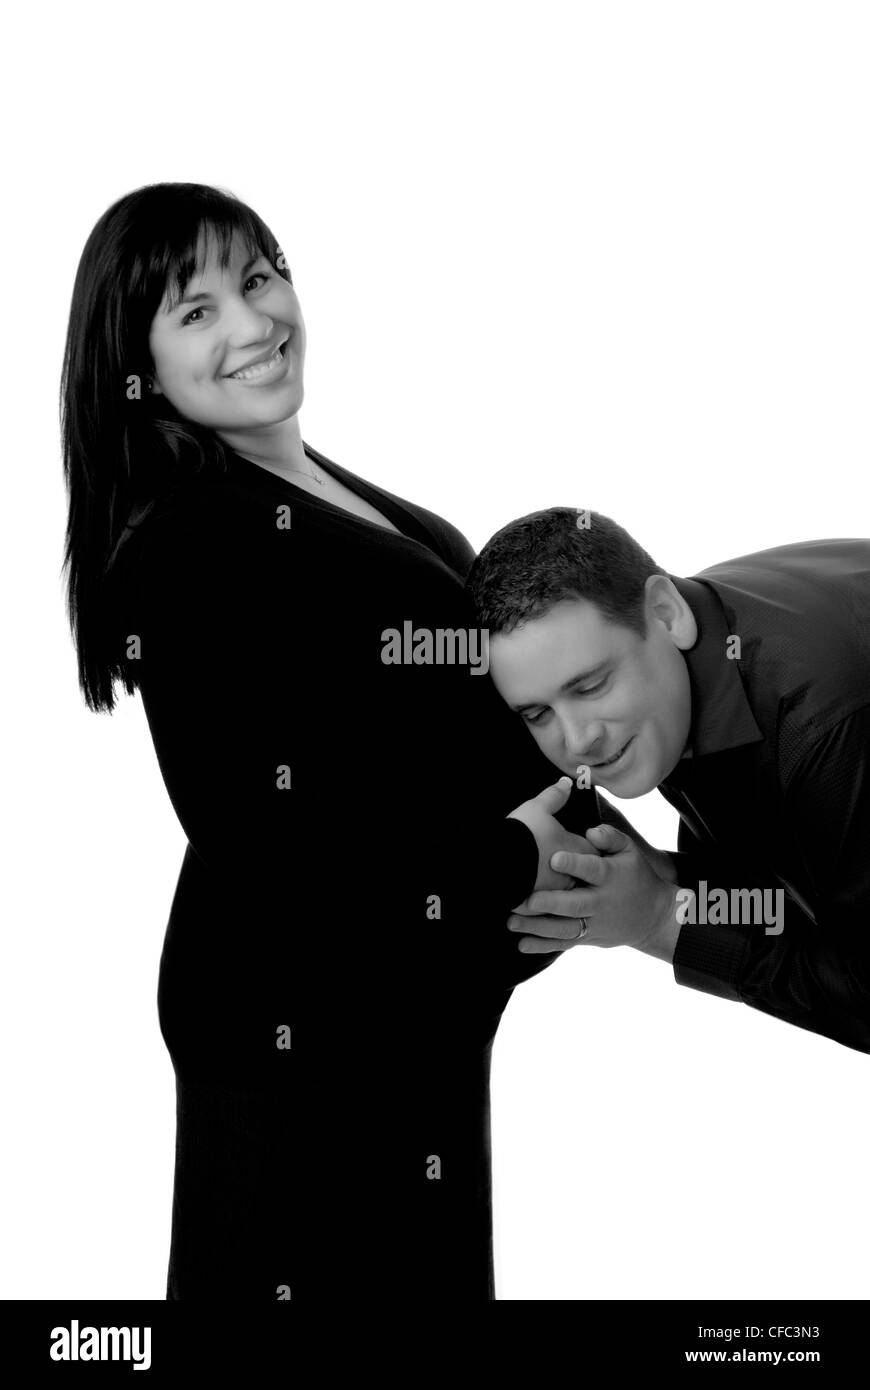 A fun maternity black and white image of father with ear to wife's pregnant belly. Stock Photo